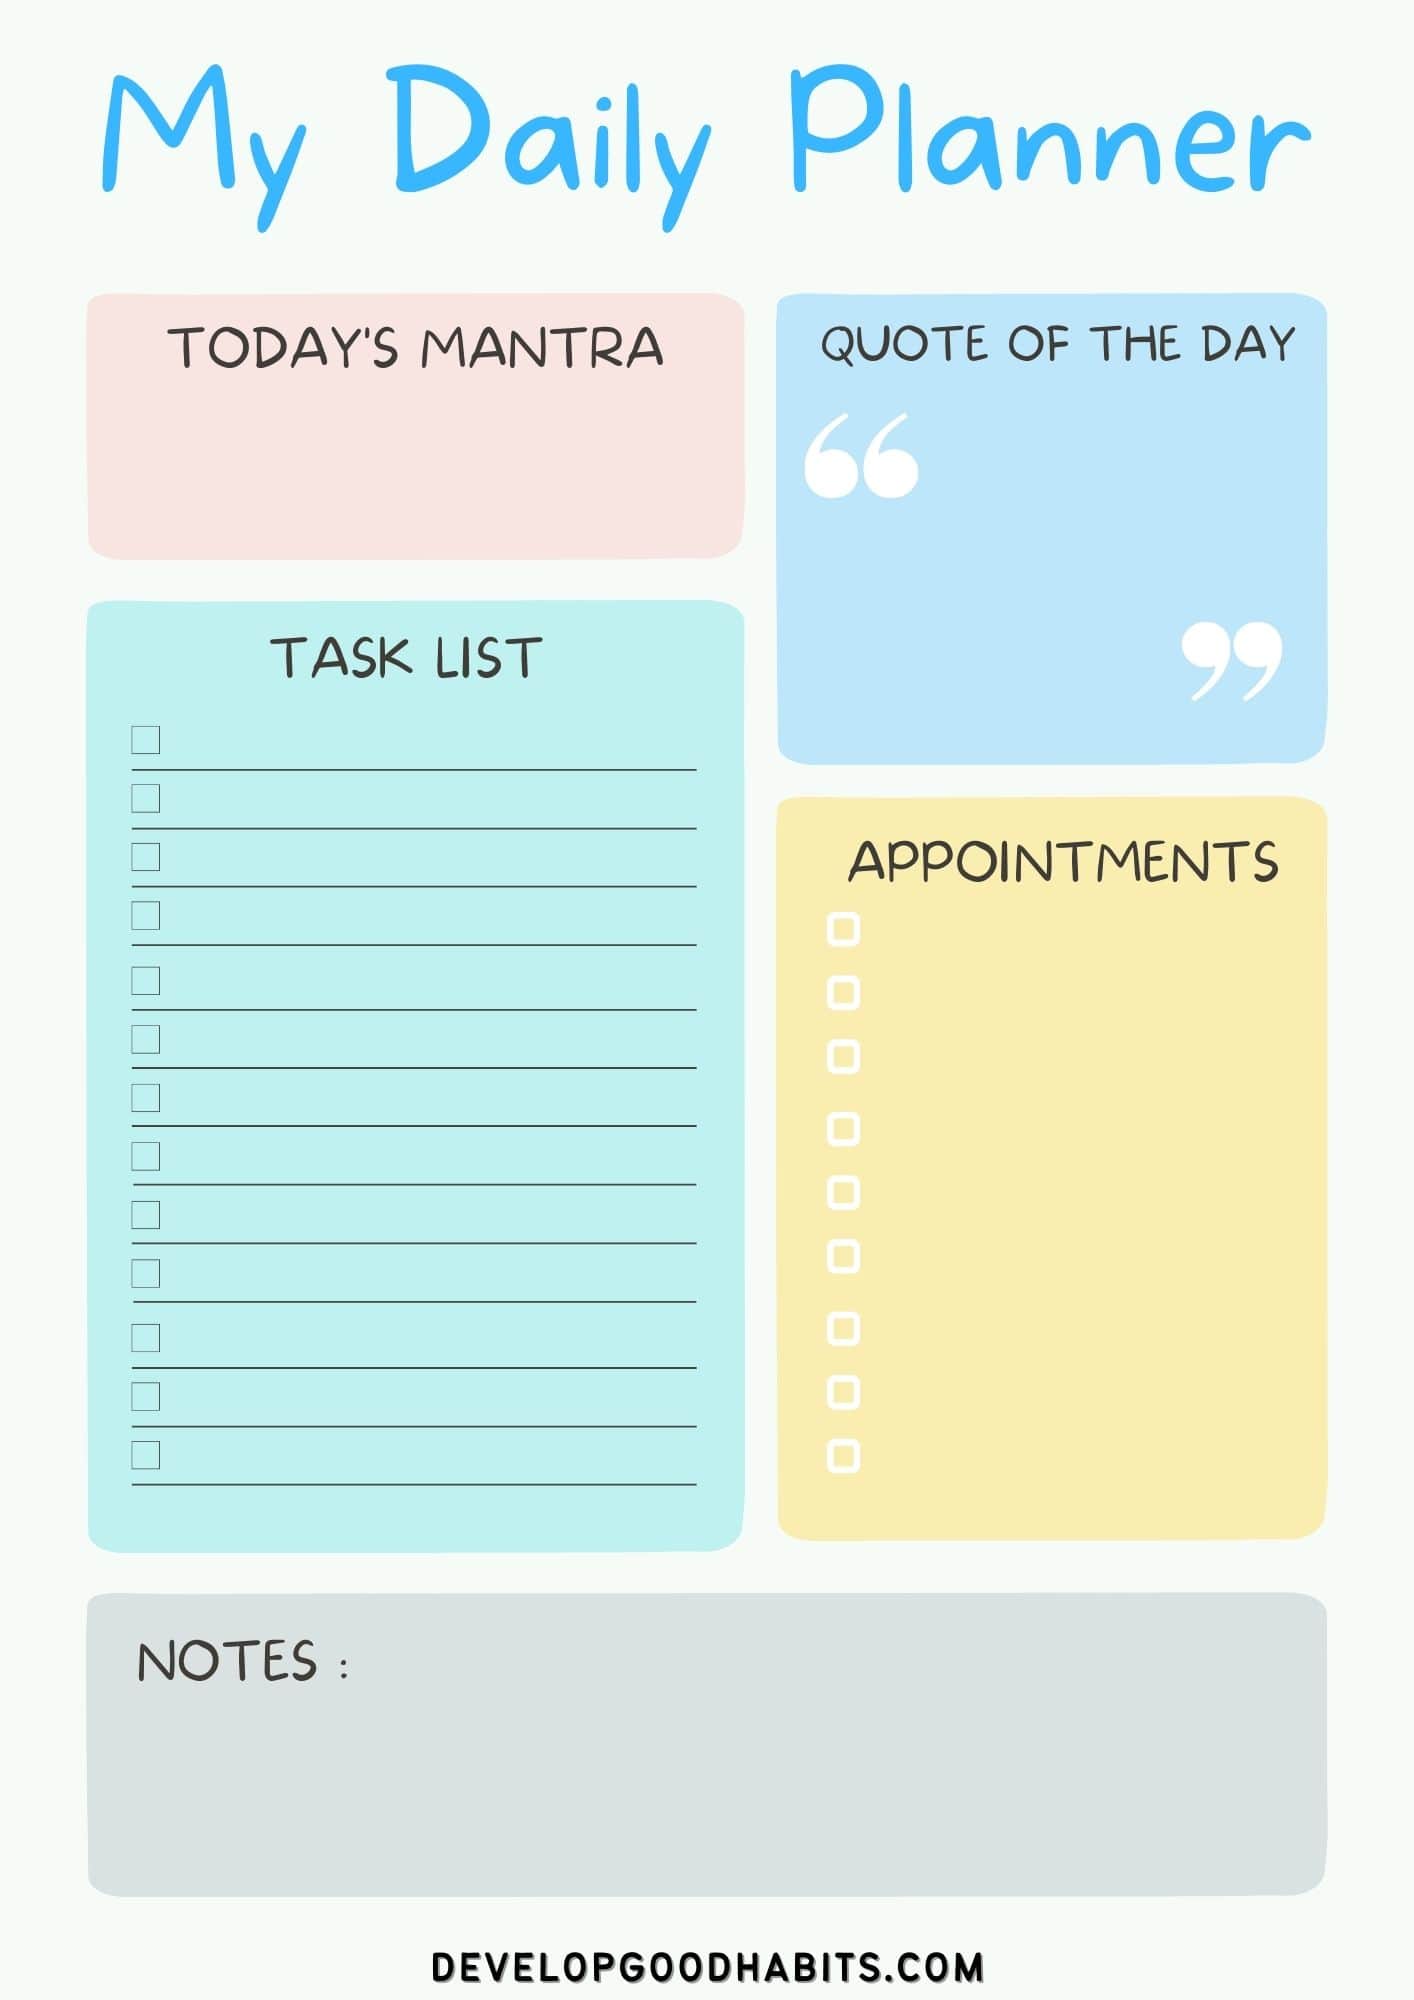 Download Printable Daily Wellness Journal Template PDF